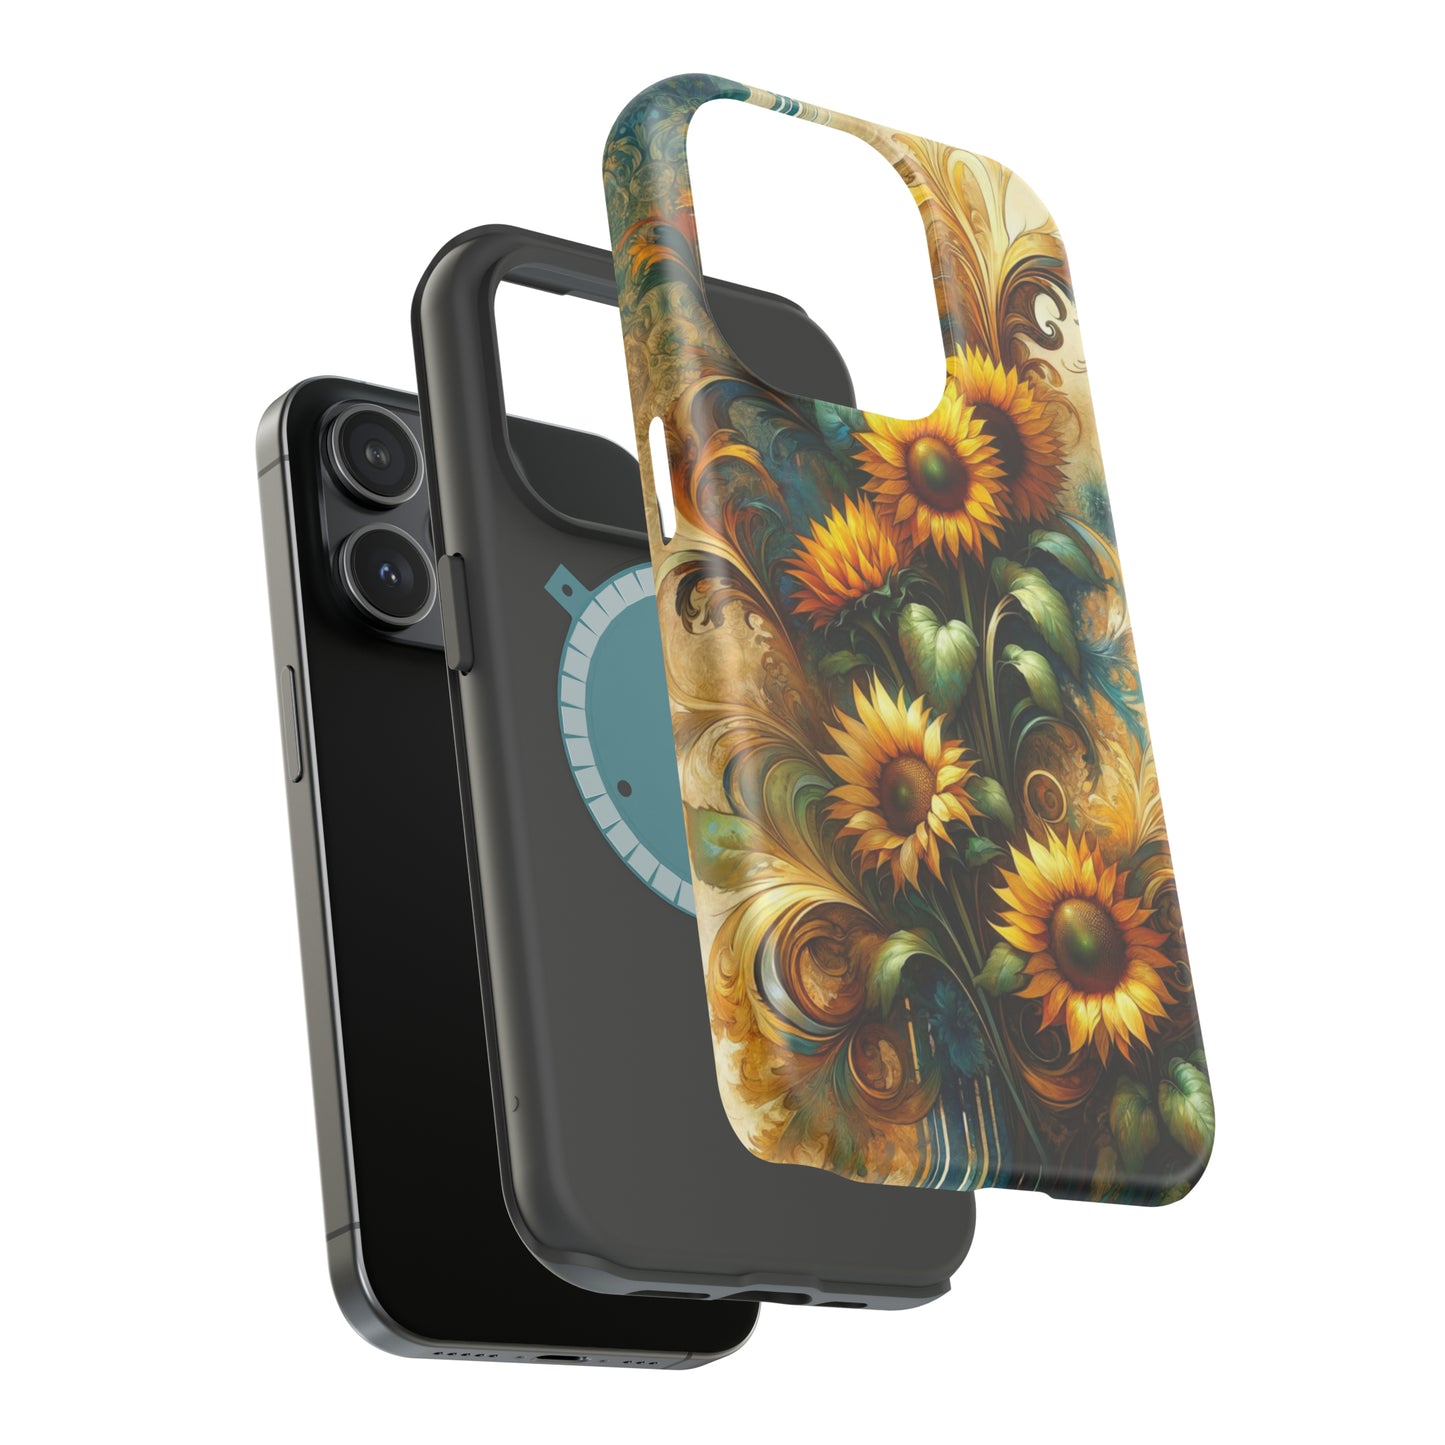 Trendy Watercolor Floral & Damask Pattern With Sunflowers - MagSafe Case – Durable, Stylish Protection for iPhone, Wireless Charging Compatible